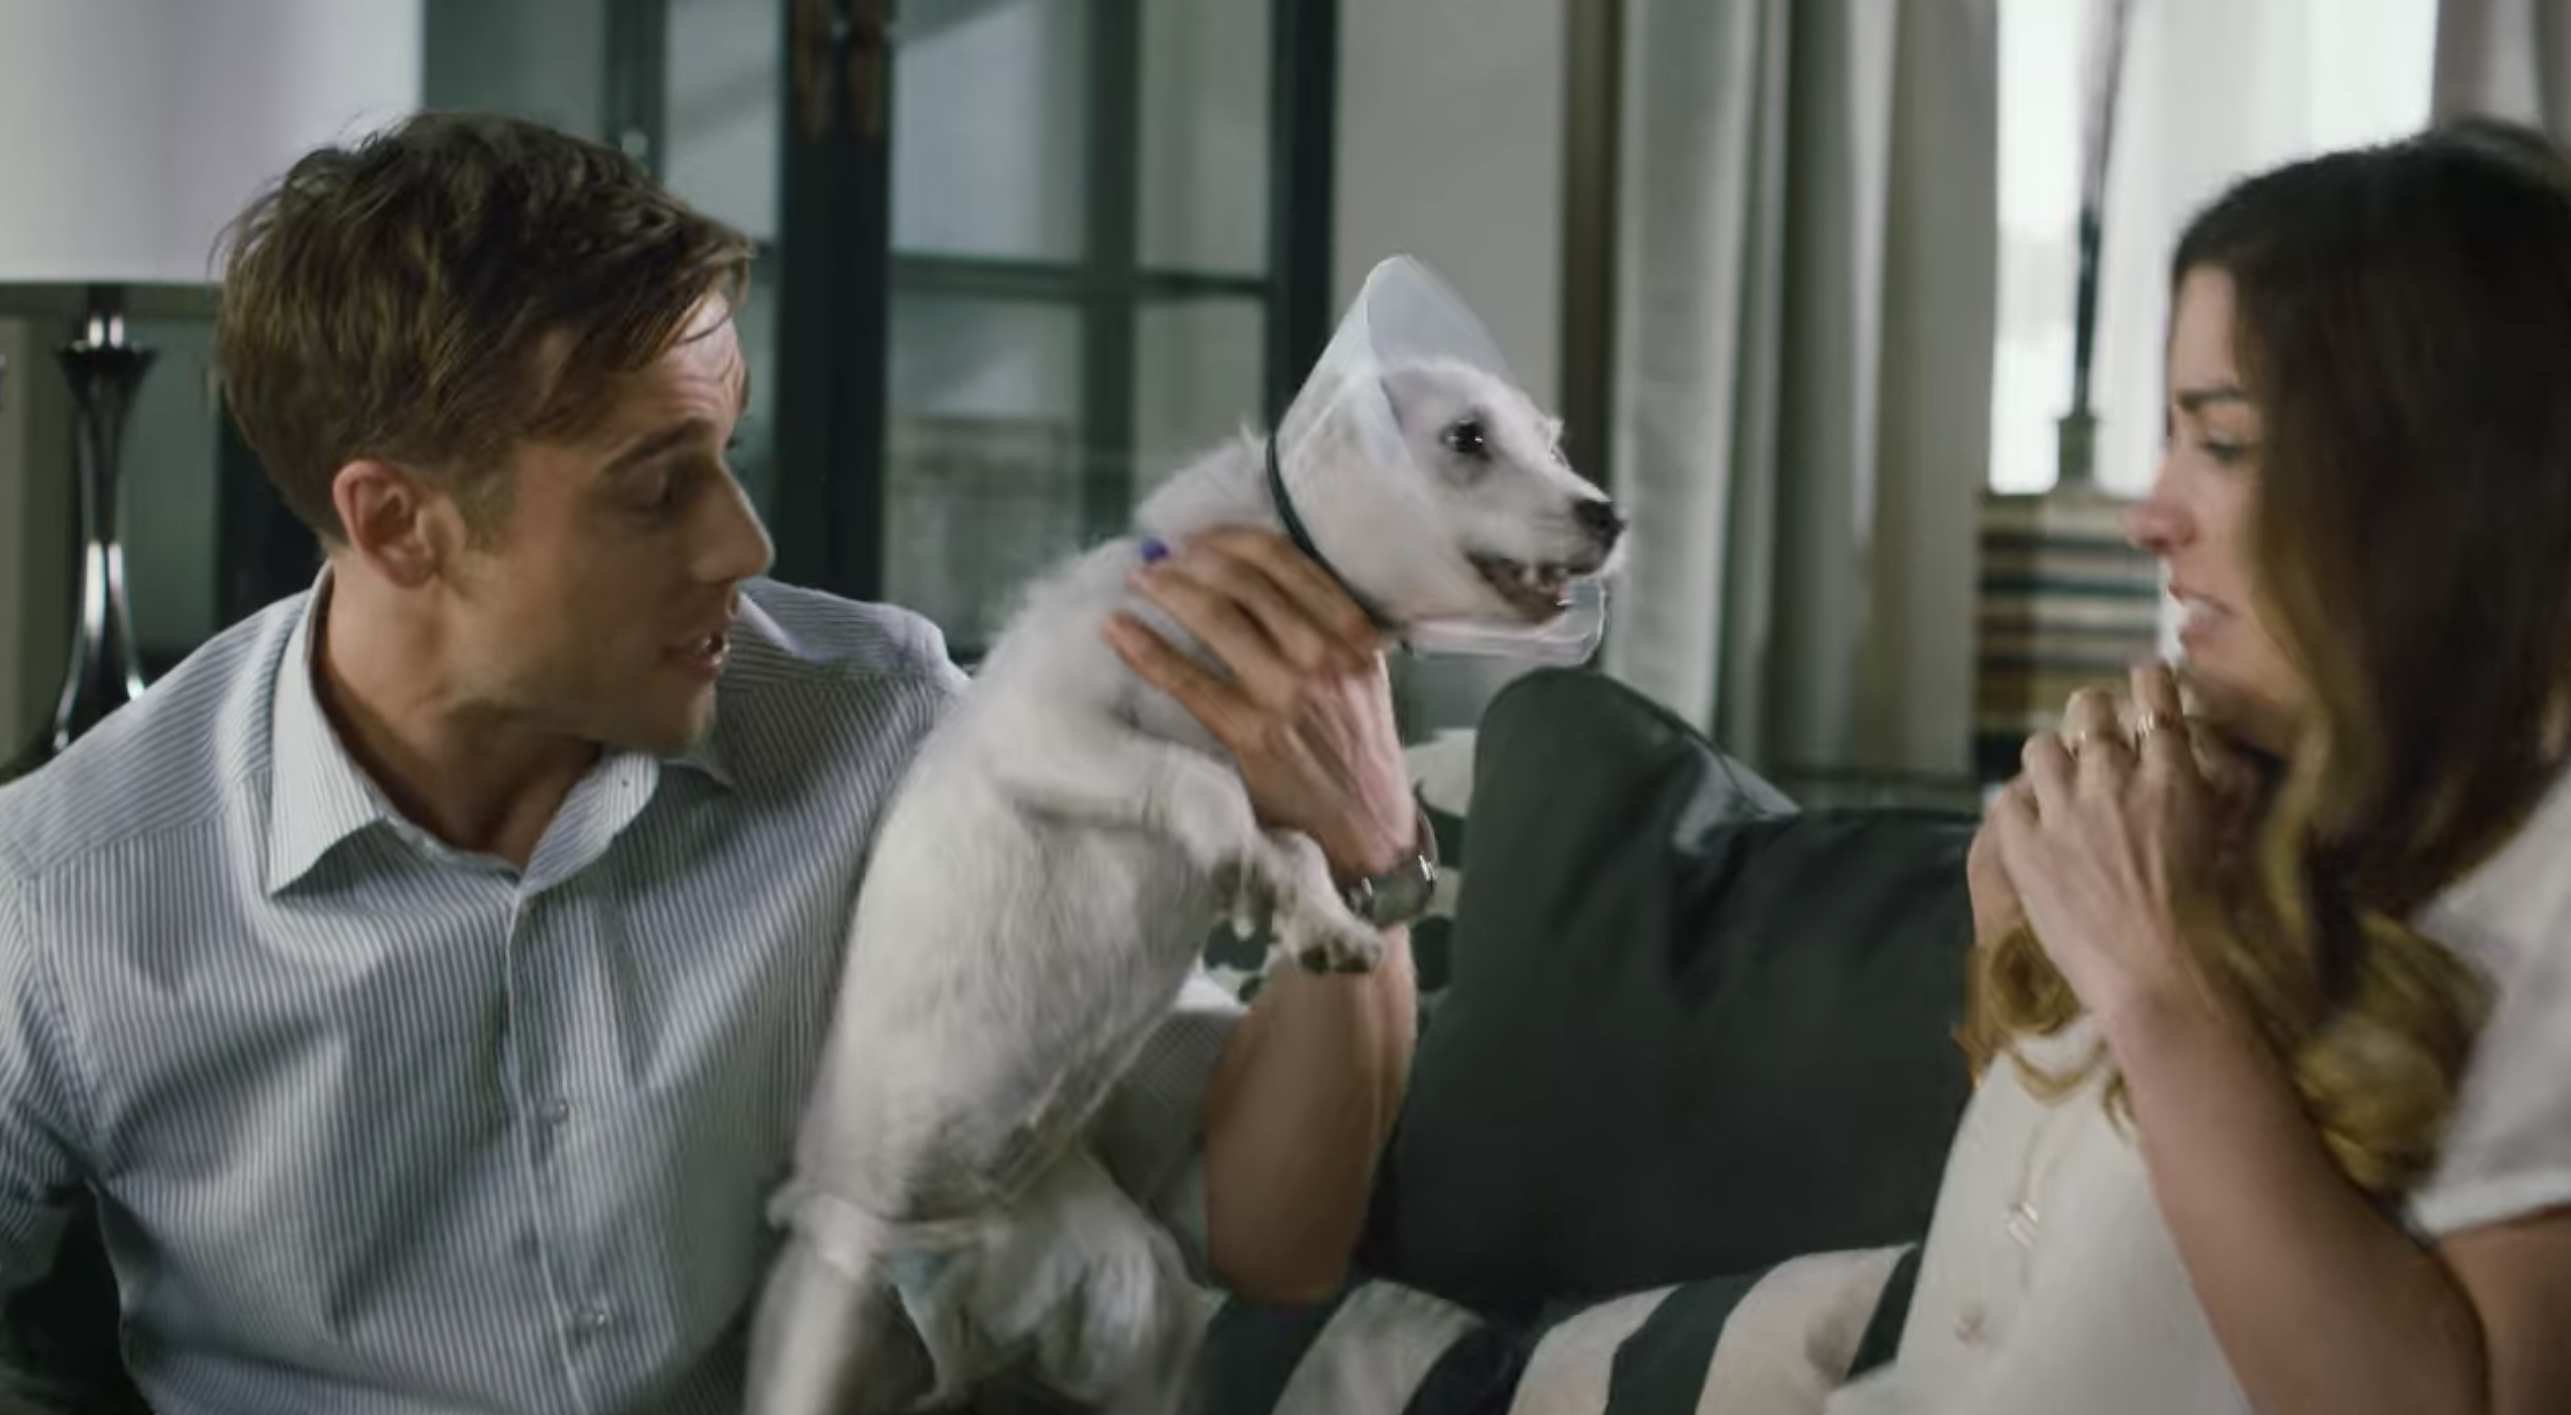 Dustin holding a dog with a cone on it&#x27;s head as a startled woman leans back in Schitt&#x27;s Creek